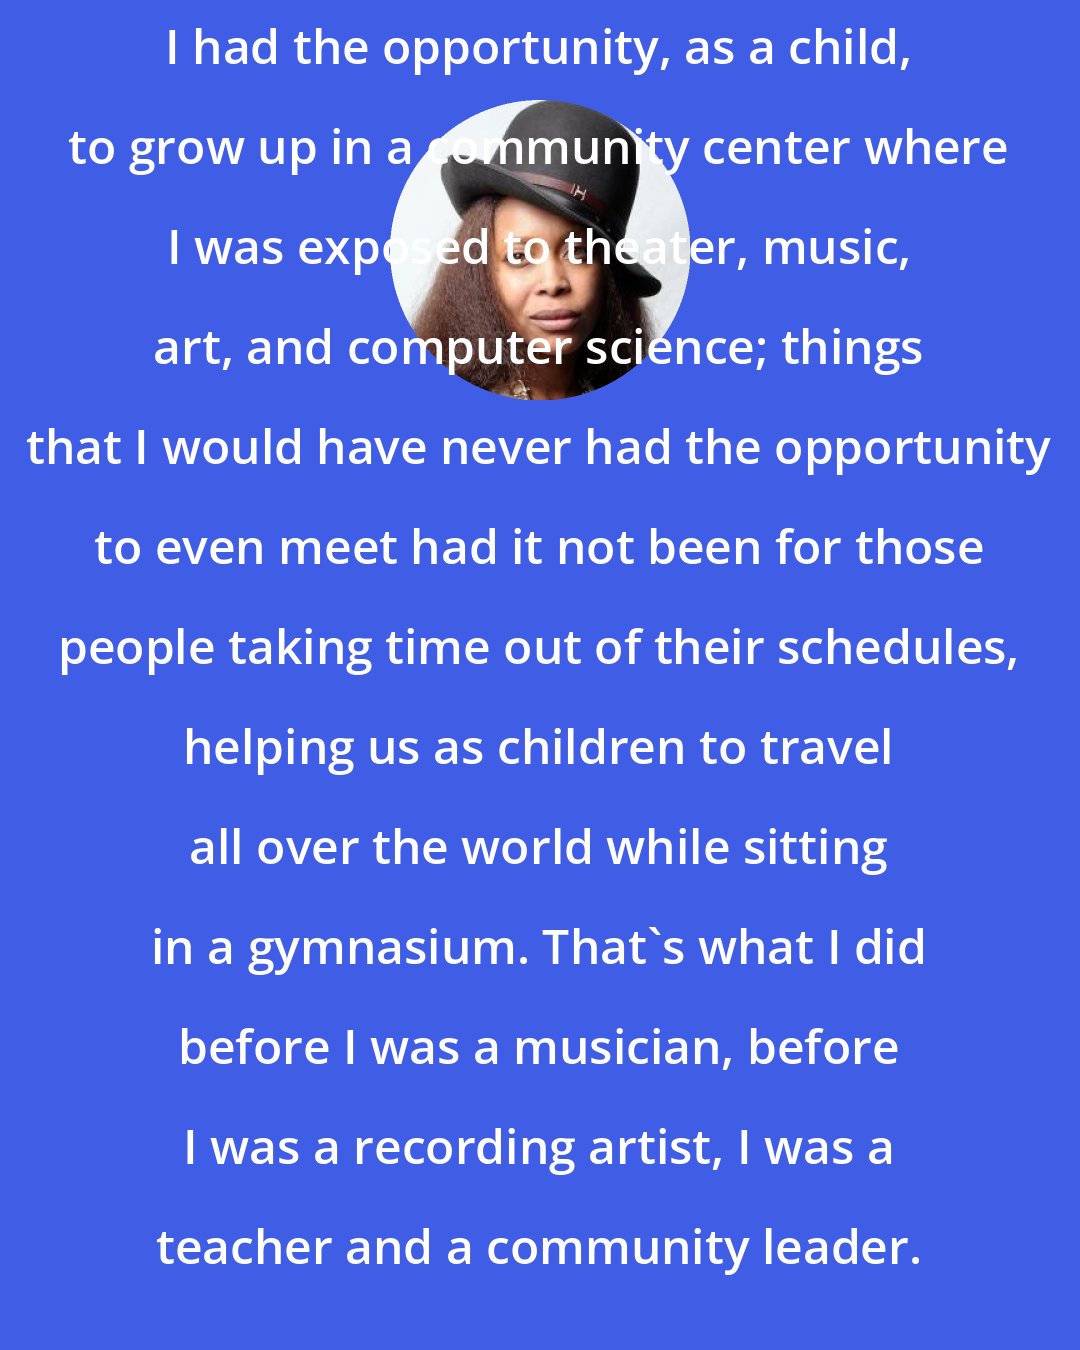 Erykah Badu: I had the opportunity, as a child, to grow up in a community center where I was exposed to theater, music, art, and computer science; things that I would have never had the opportunity to even meet had it not been for those people taking time out of their schedules, helping us as children to travel all over the world while sitting in a gymnasium. That's what I did before I was a musician, before I was a recording artist, I was a teacher and a community leader.